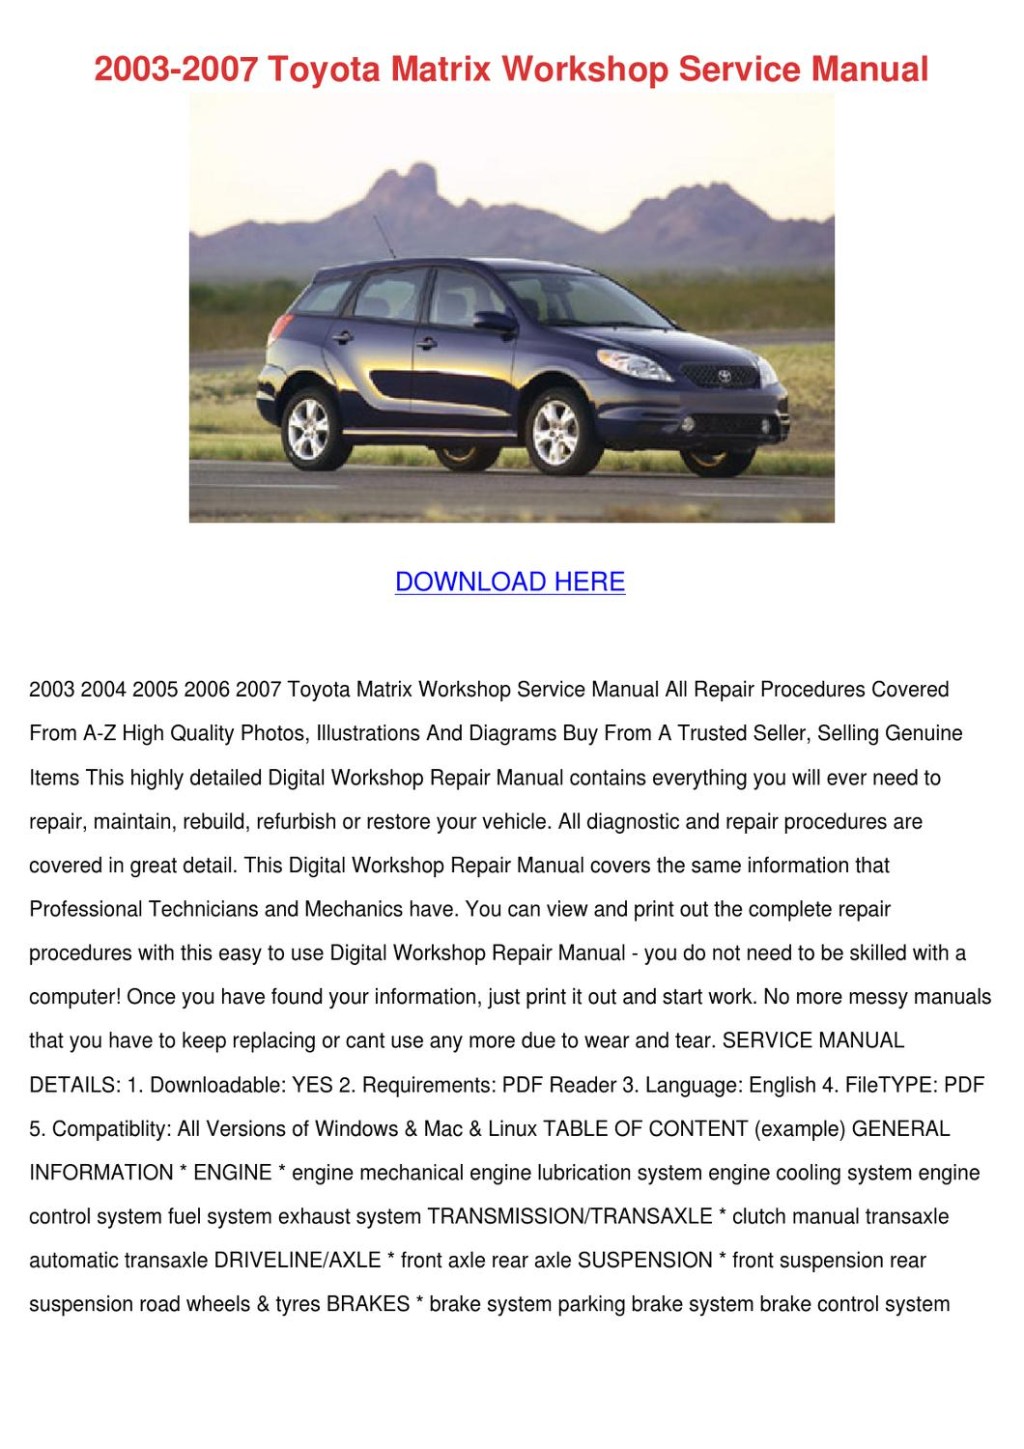 Picture of: Toyota Matrix Workshop Service Manu by Sonia Mahoney – Issuu